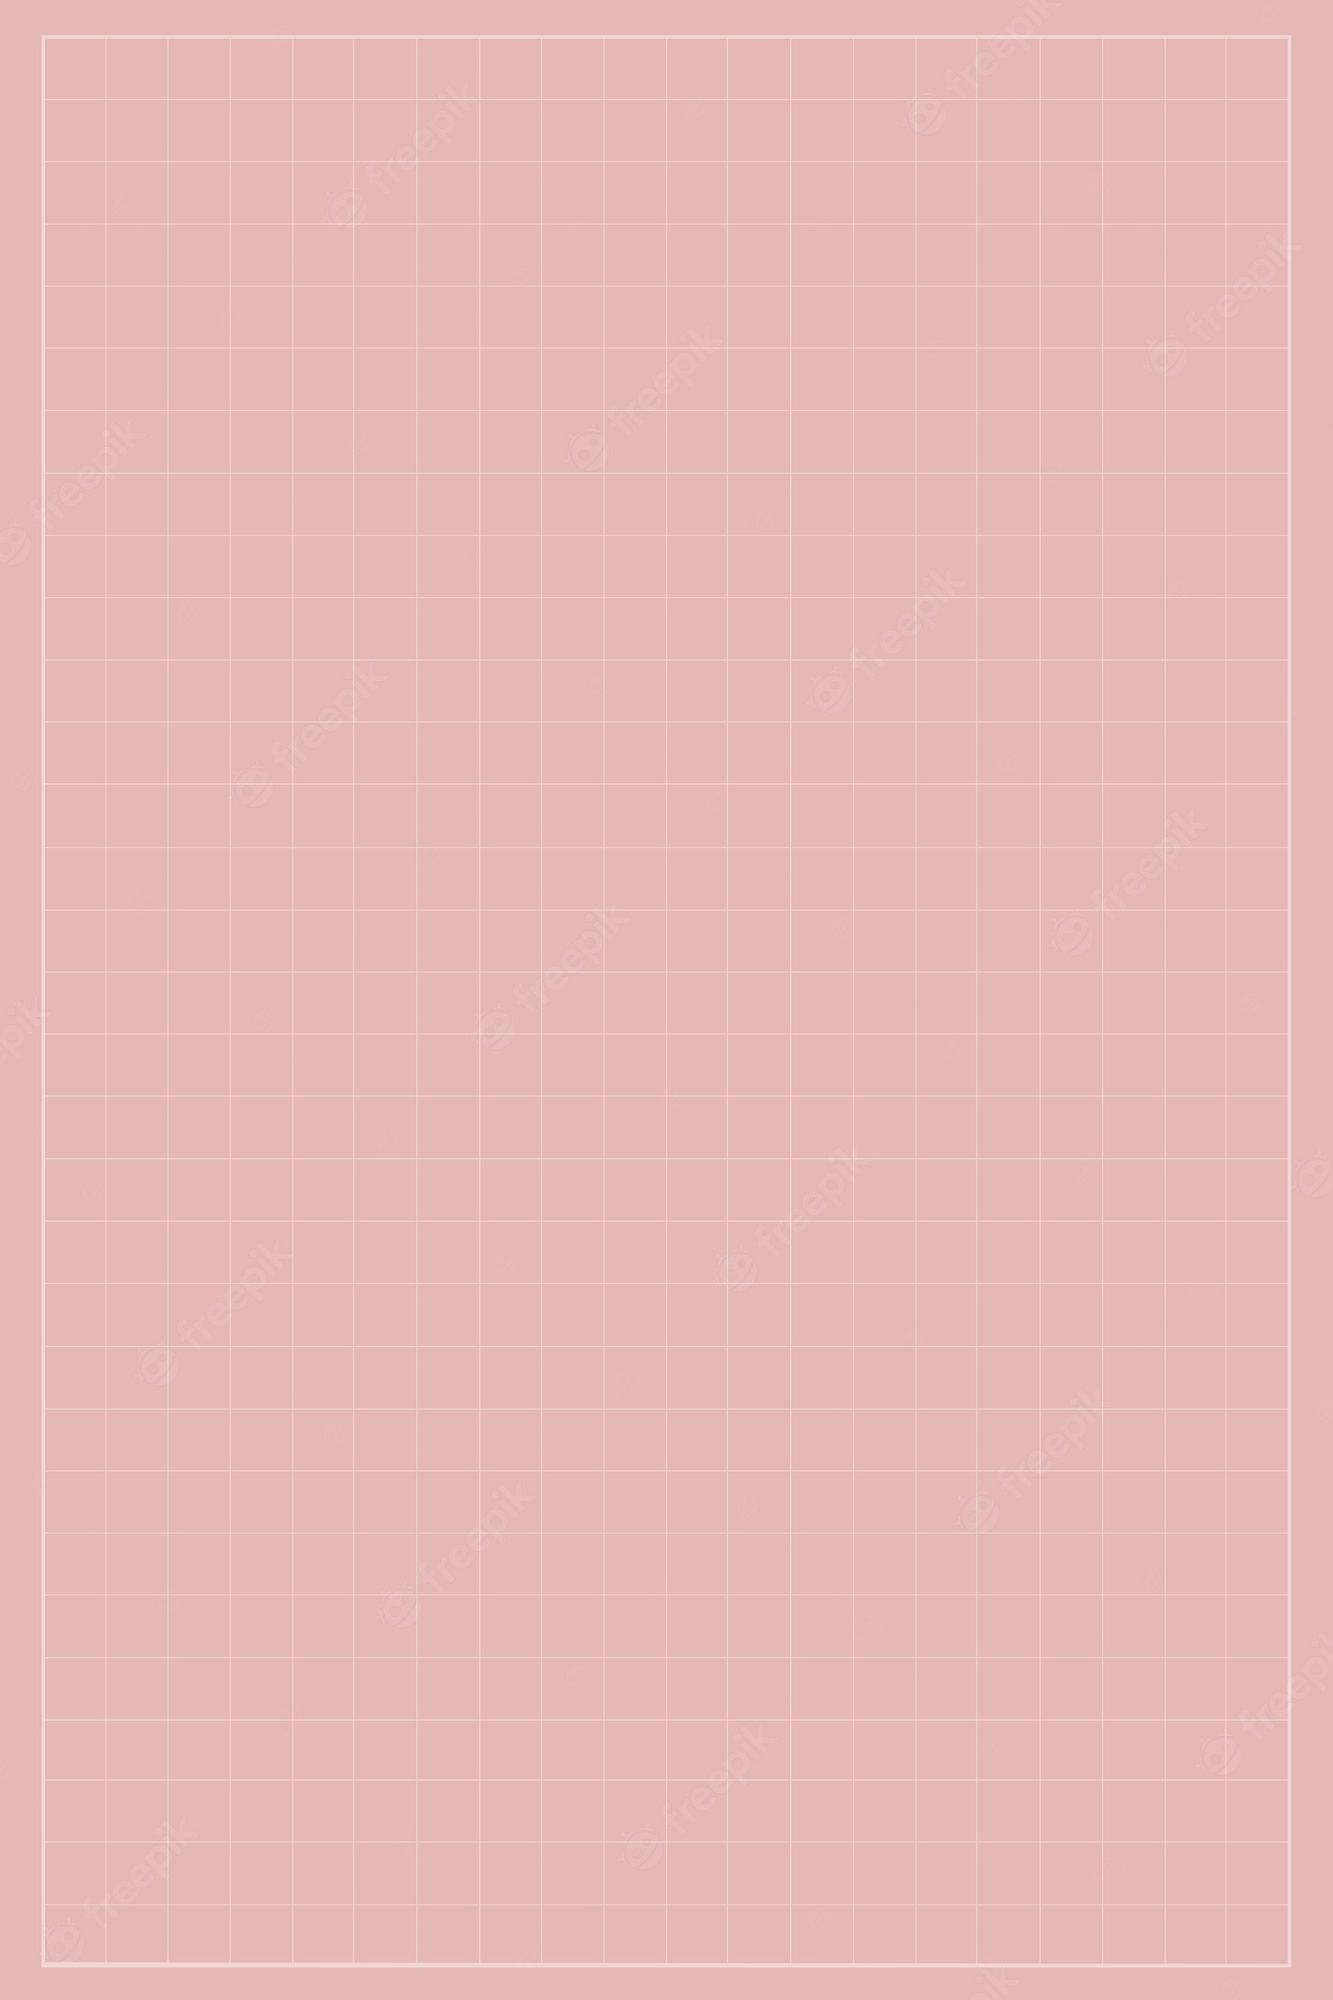 A pink background with a grid of white lines - Grid